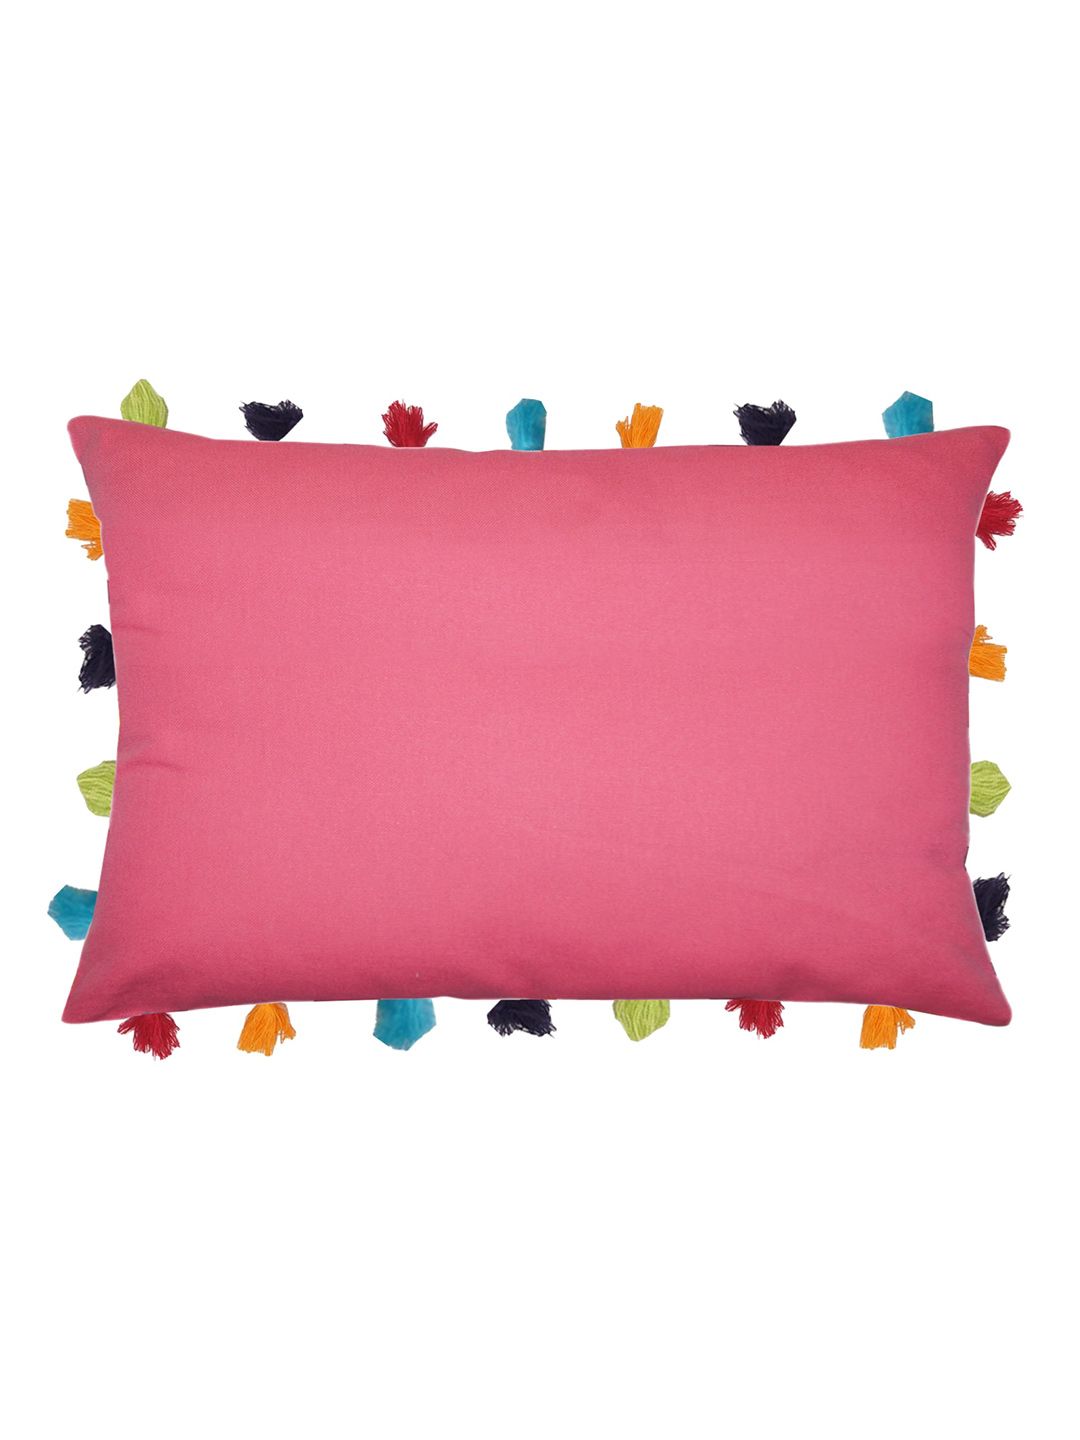 Lushomes Pink Rectangle Cushion Covers With Colorful Tassels Price in India